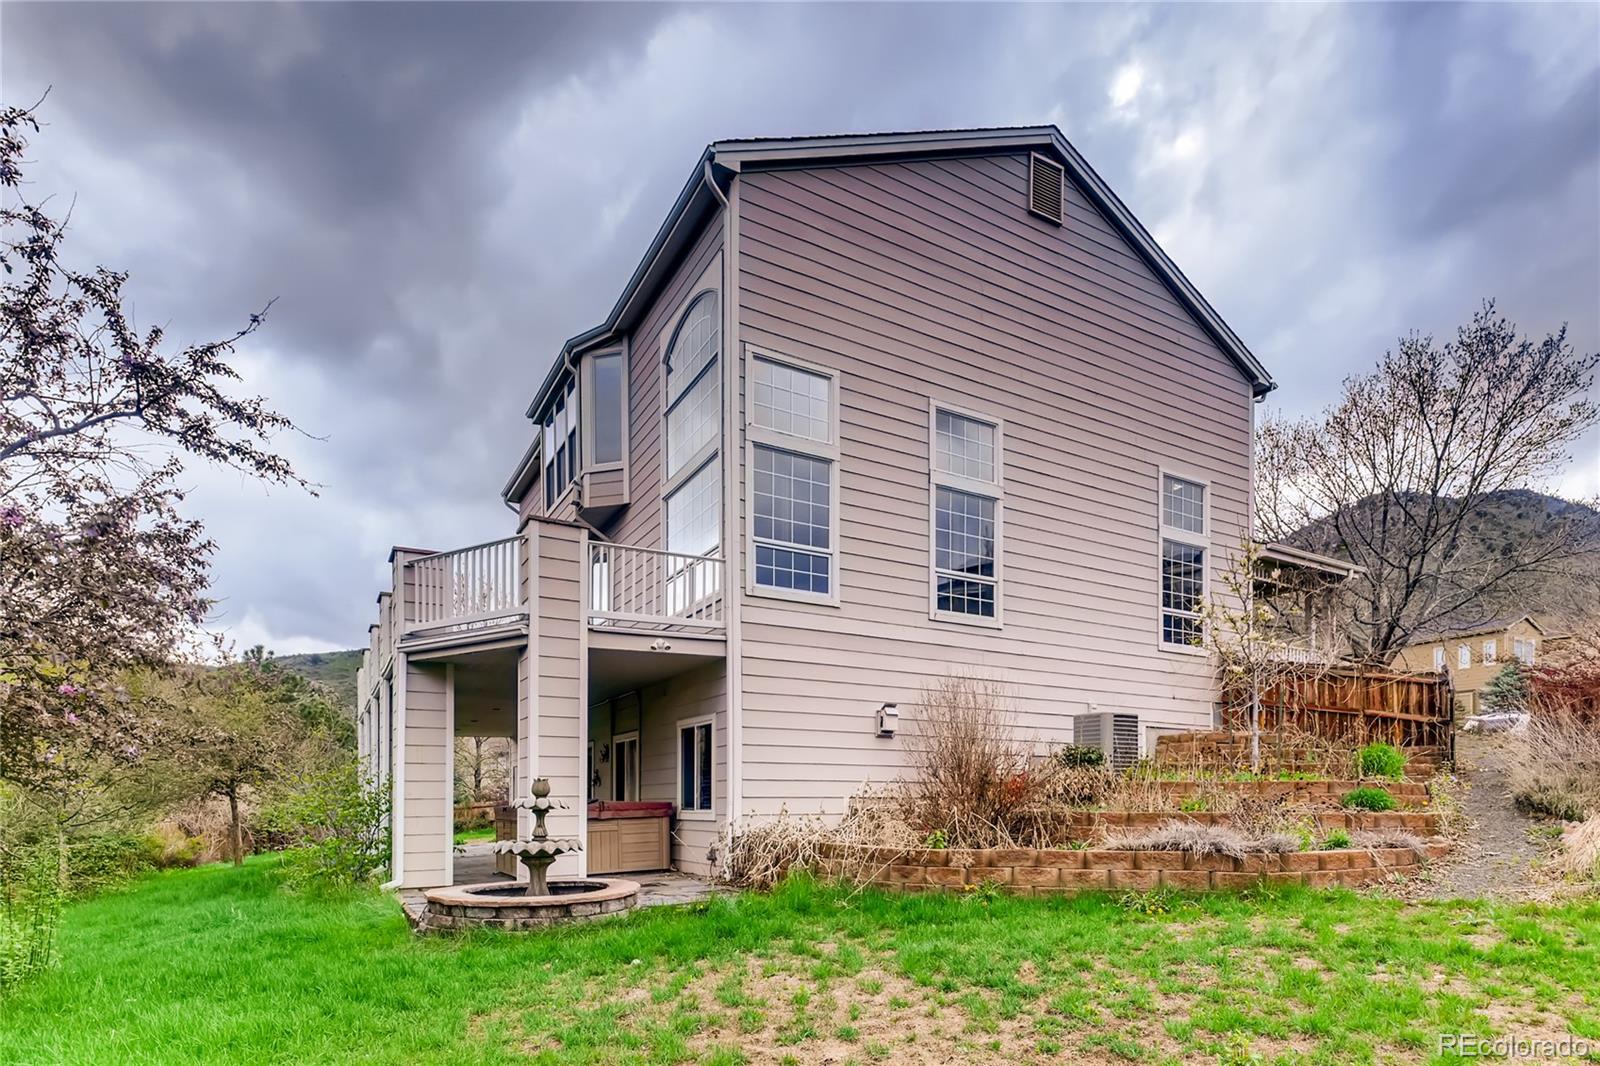 1540 Valley View, Golden, CO